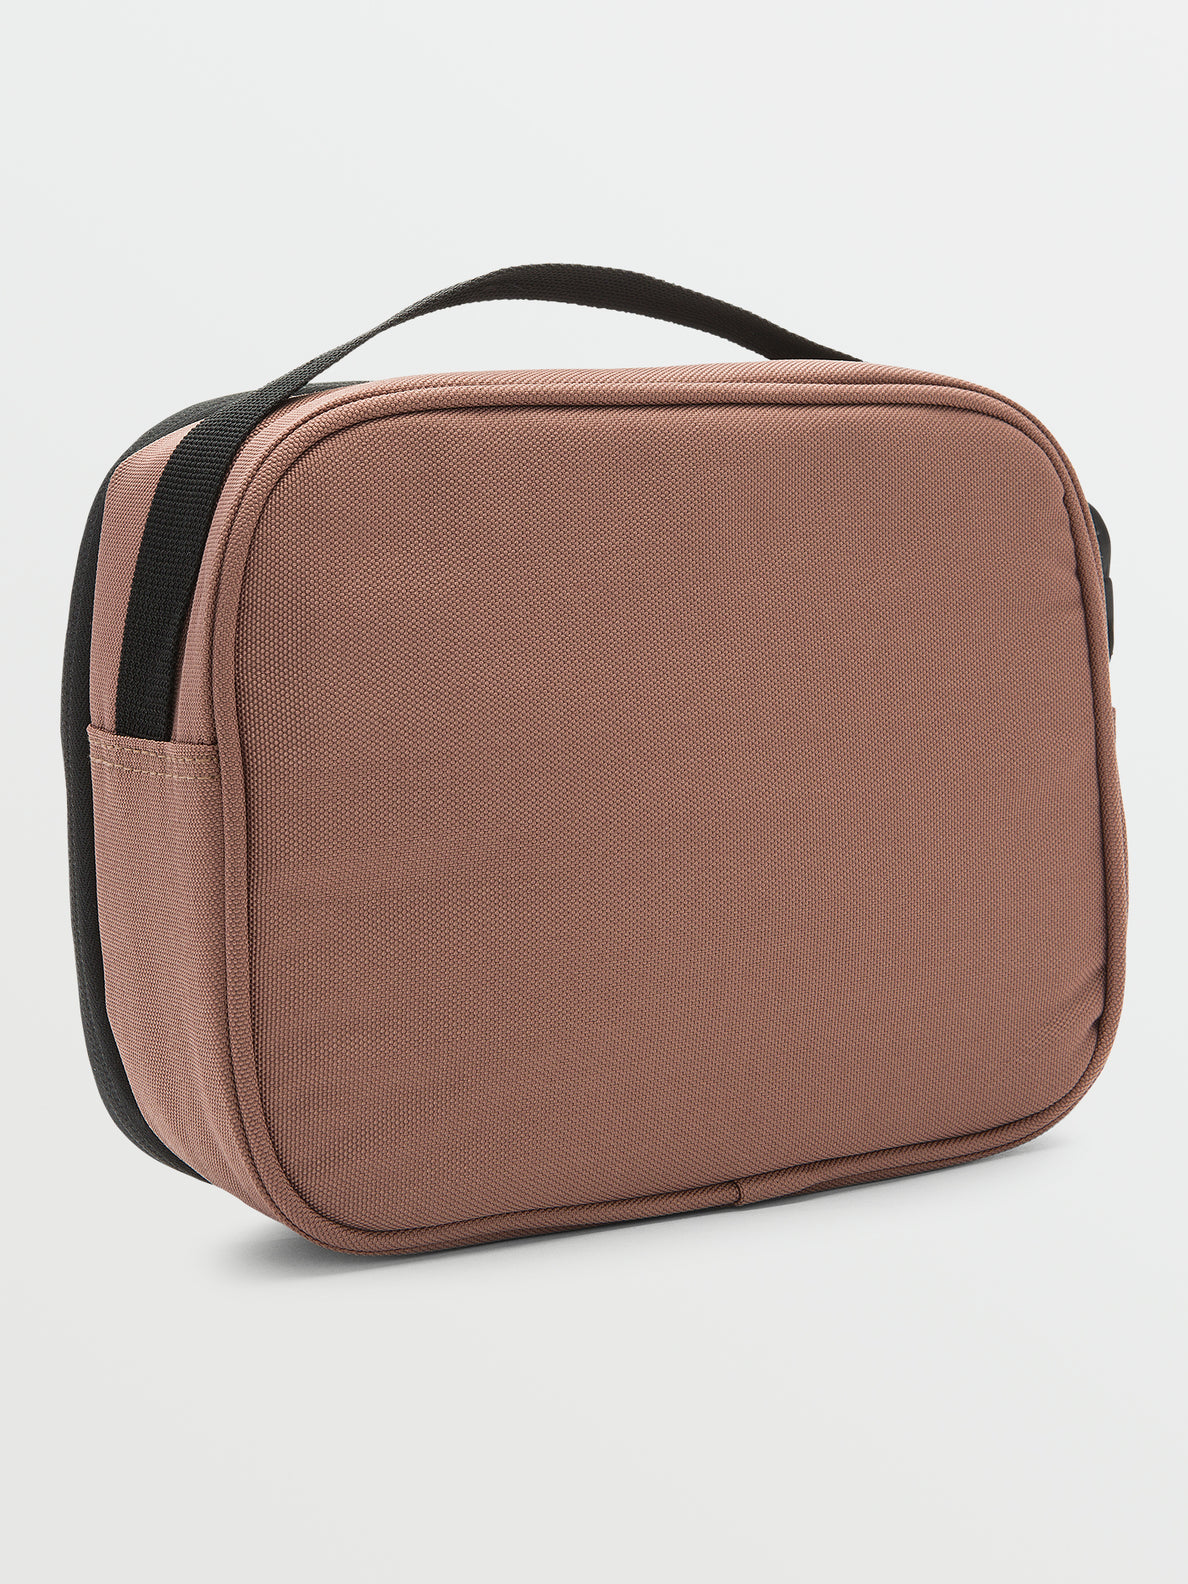 Lunch Bag - Dusty Brown